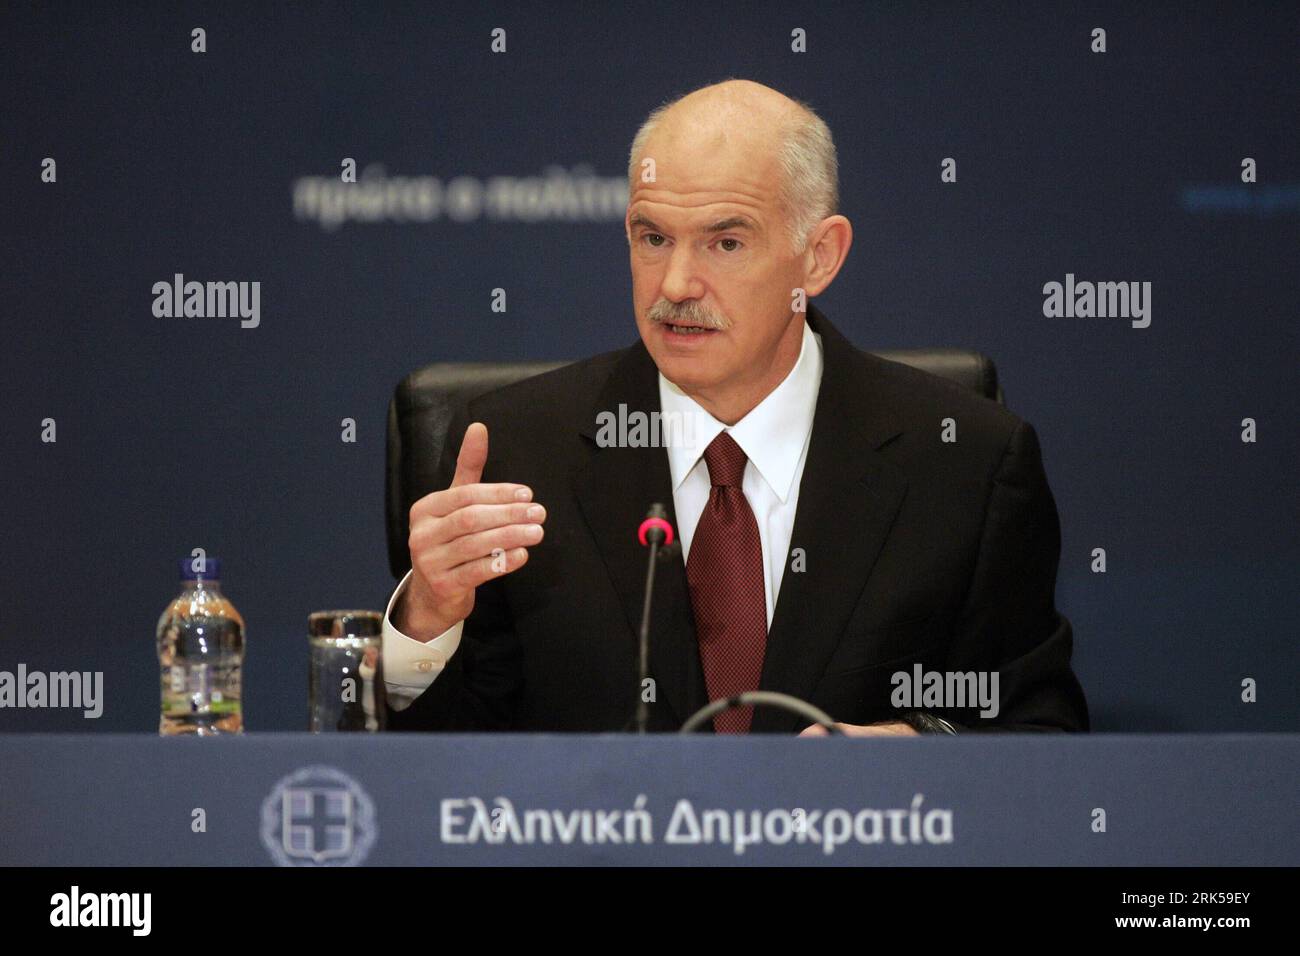 Bildnummer: 53724847  Datum: 13.01.2010  Copyright: imago/Xinhua (100113) -- ATHENS, Jan. 13, 2010 (Xinhua) -- Greek Prime Minister George Papandreou speaks during a press conference held on the day his socialist government completes 100 days in office in Athens, capital of Greece, Jan. 13, 2010. The unprecedented size of the economic crisis Greece faces today demands urgent, bold, historic measures and Greece can win the challenge alone, George Papandreou said on Wednesday. (Xinhua/ Marios Lolos) (gxr) (1)GREECE-ATHENS-PM-PRESS CONFERENCE PUBLICATIONxNOTxINxCHN People Politik Porträt PK kbdig Stock Photo